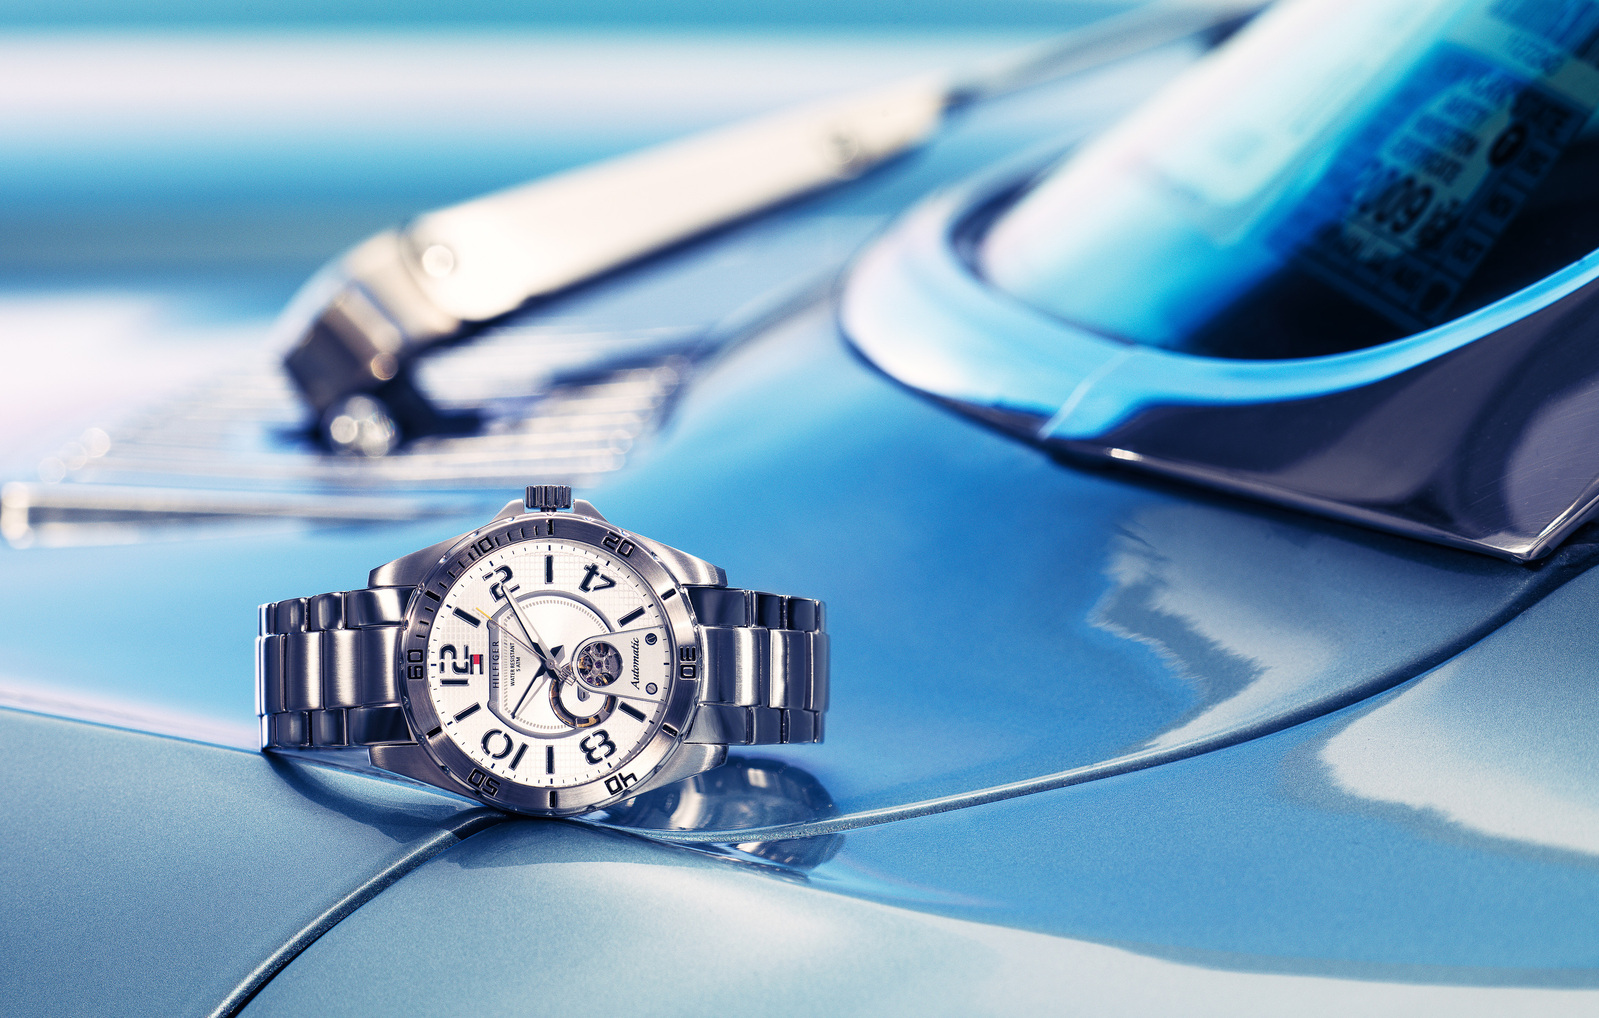 Timepiece and watch product photography by commercial and advertising photographer Timothy Hogan in Los Angeles